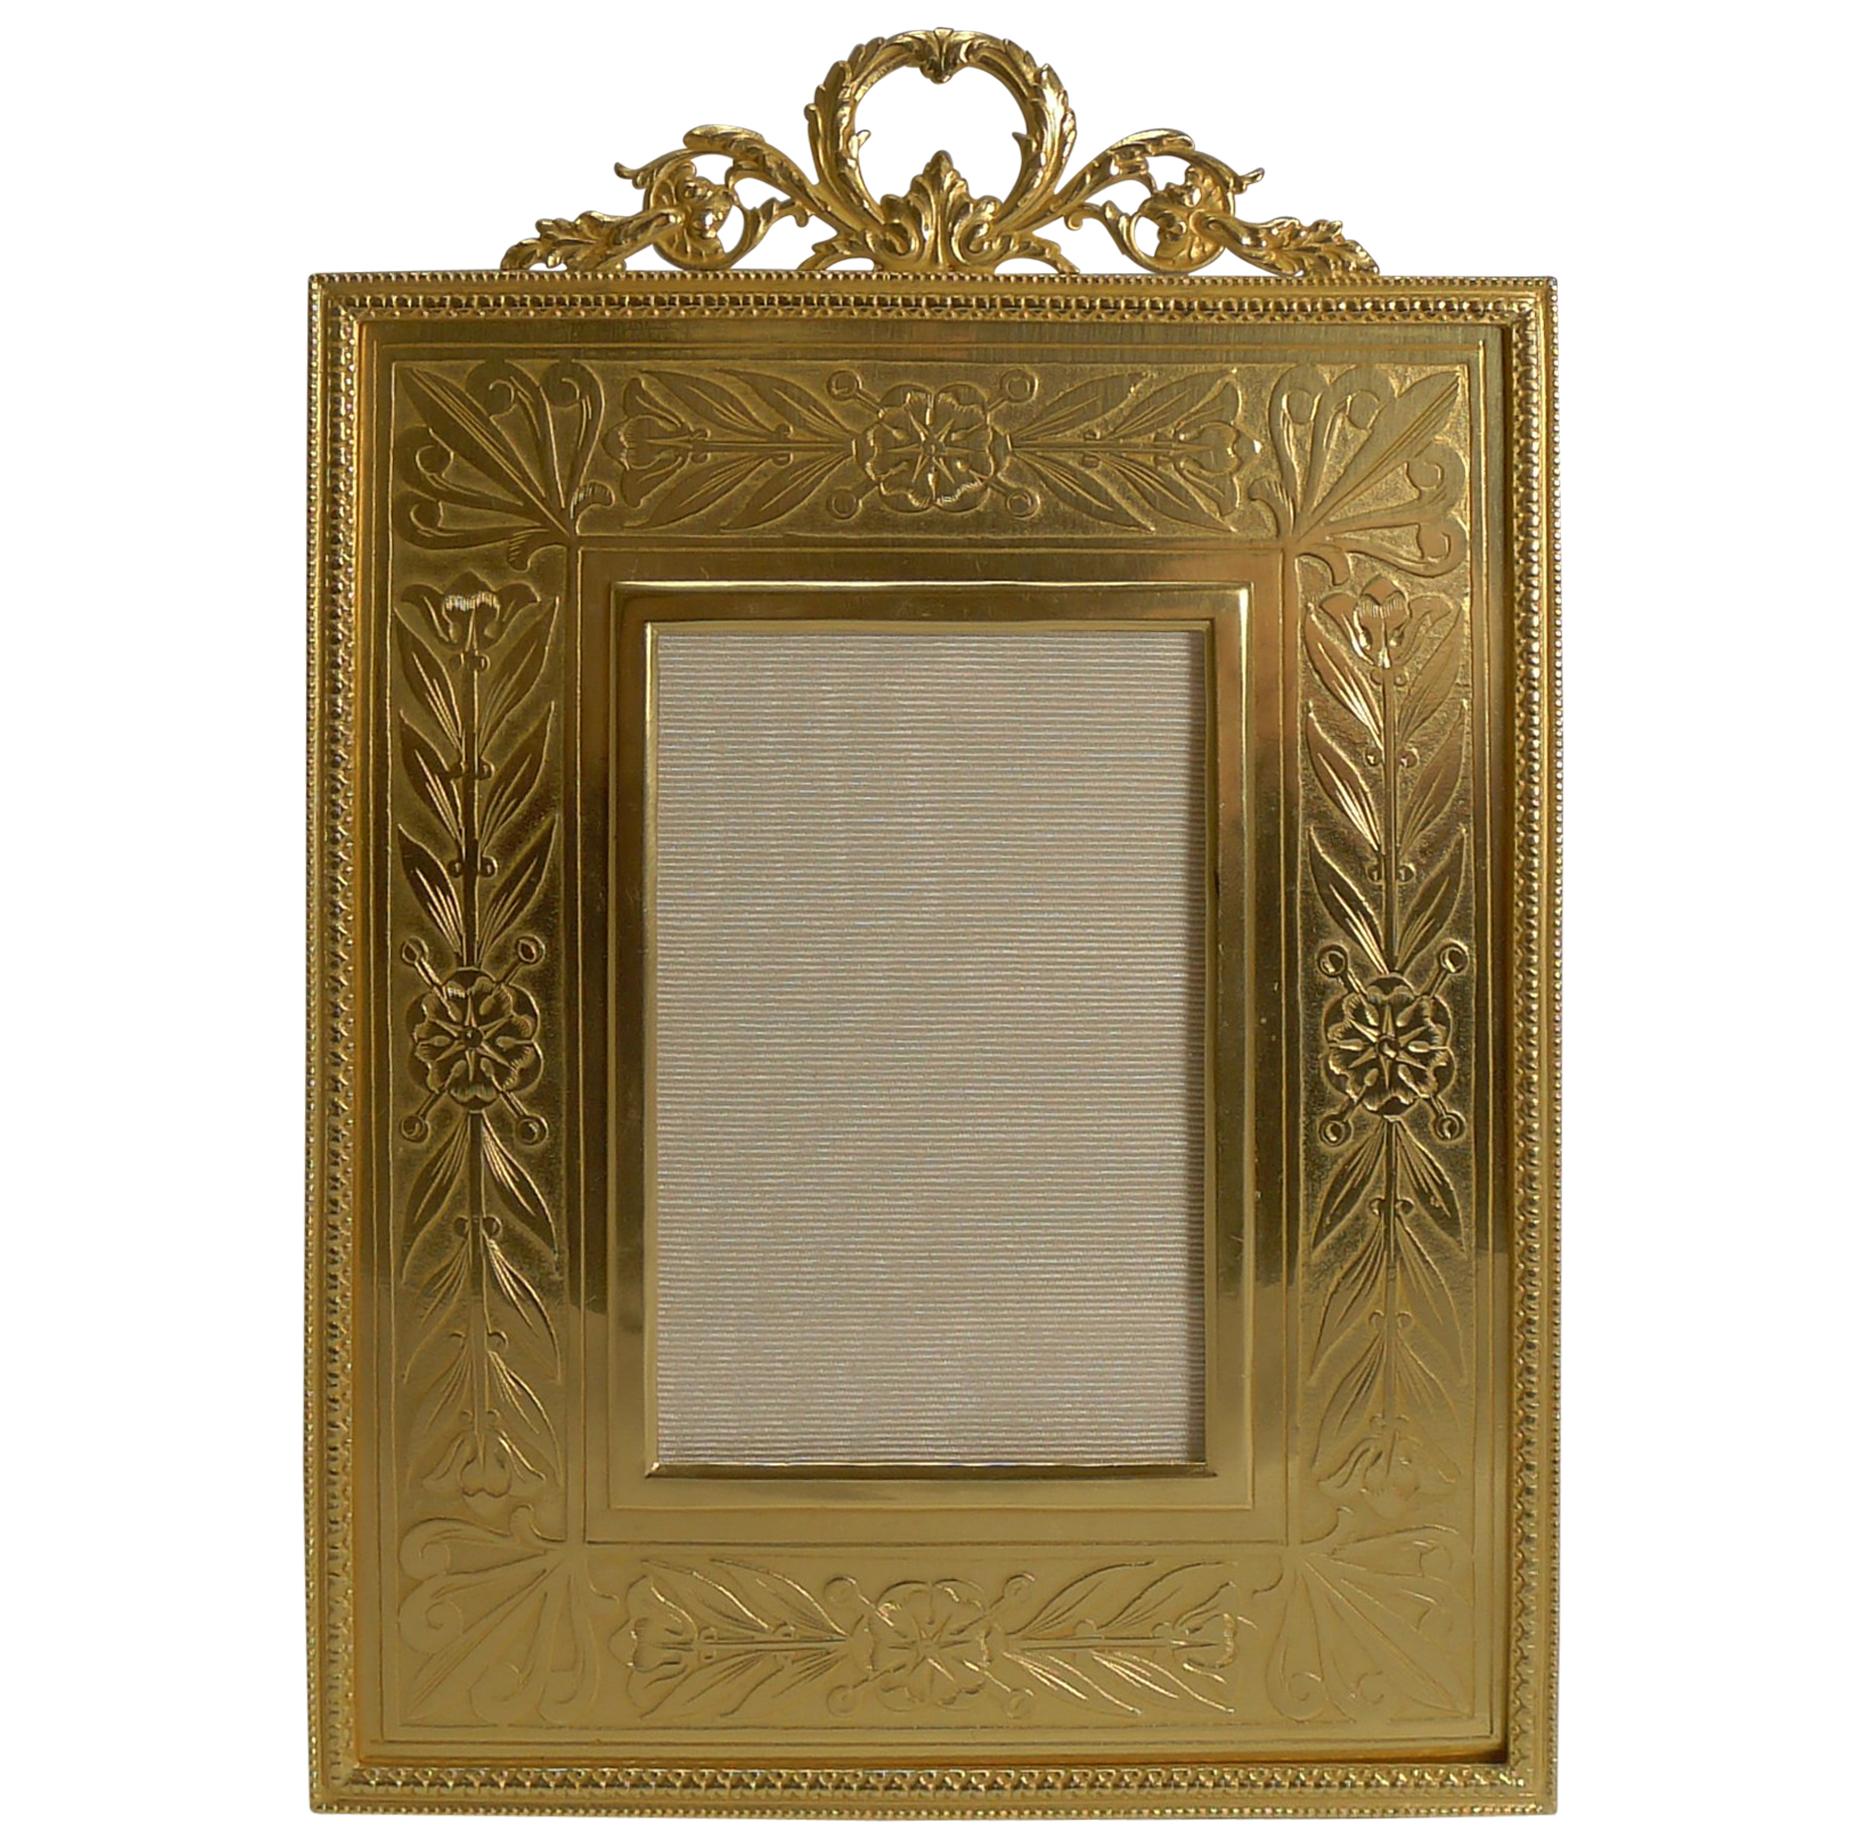 Top Quality French Gilded Bronze Photograph Frame, Engraved Slip, circa 1900